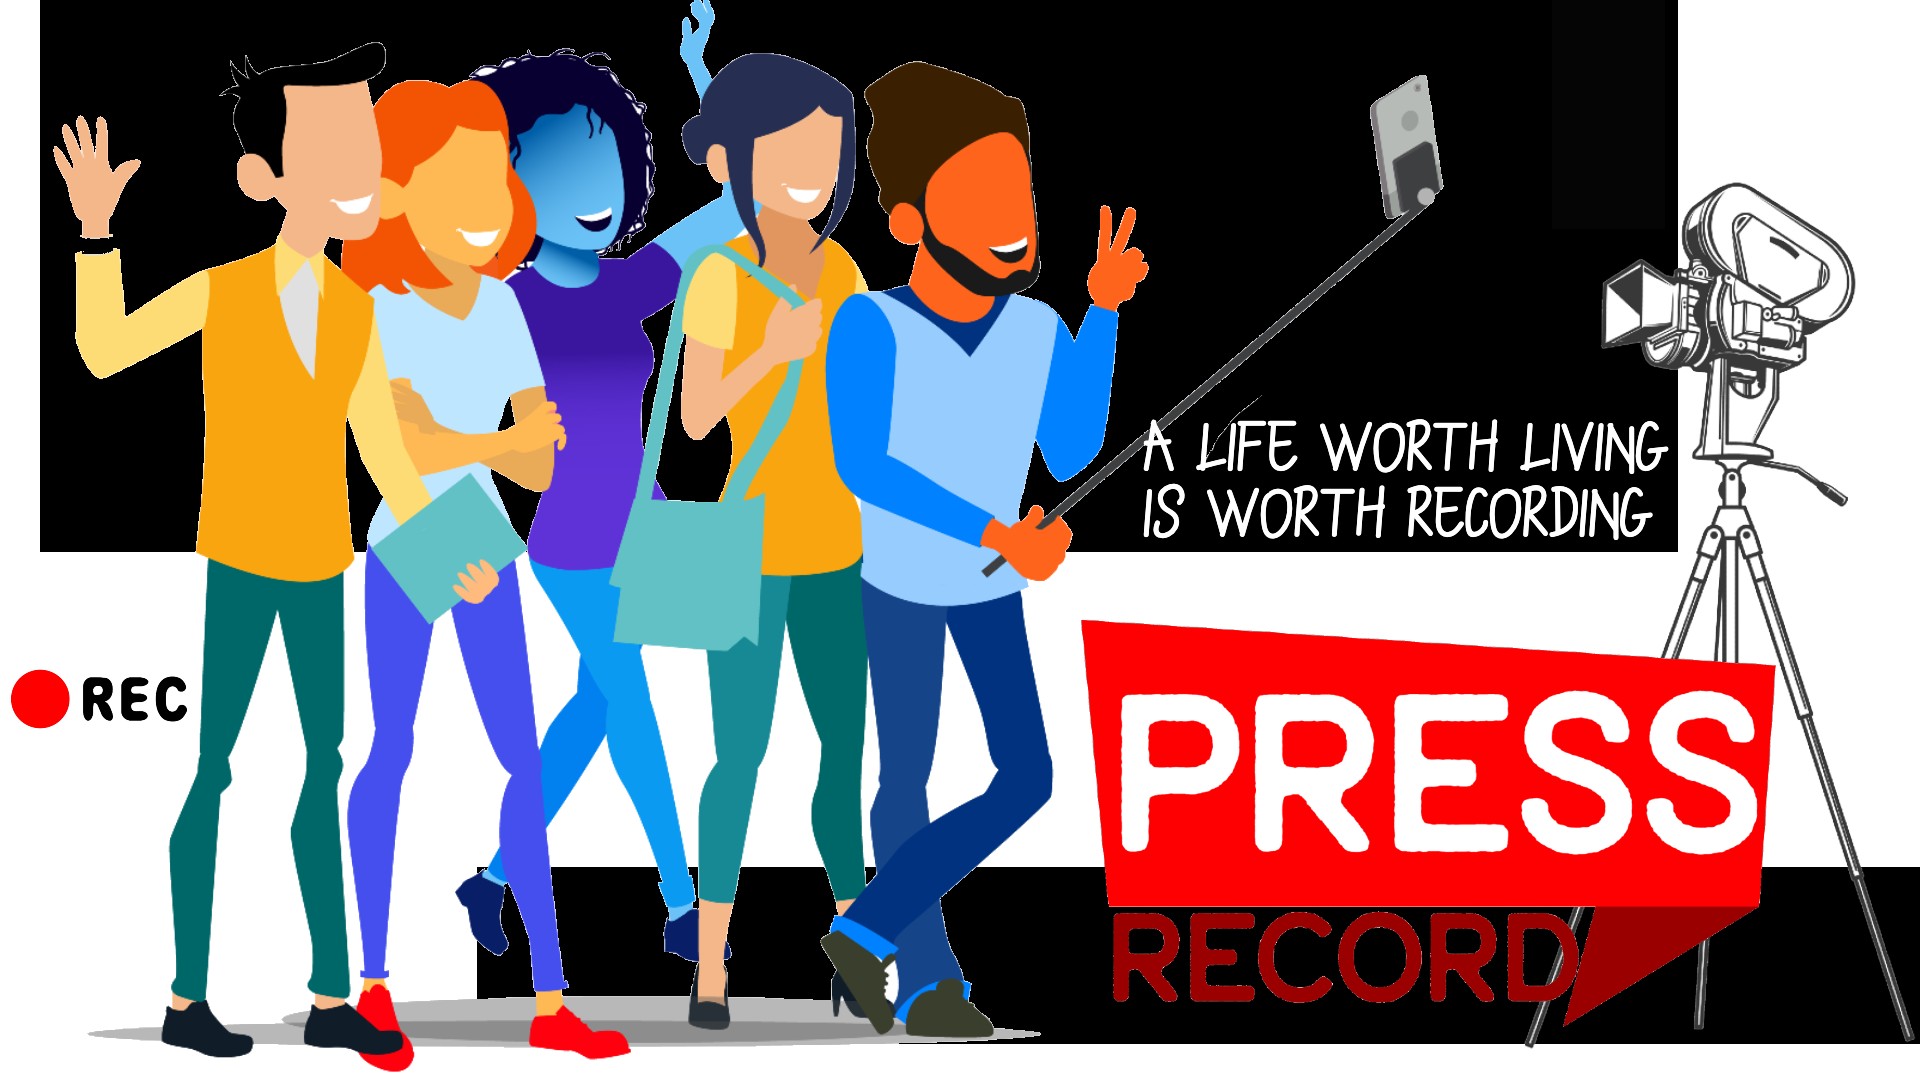 Press Record: A Life Worth Living is Worth Recording